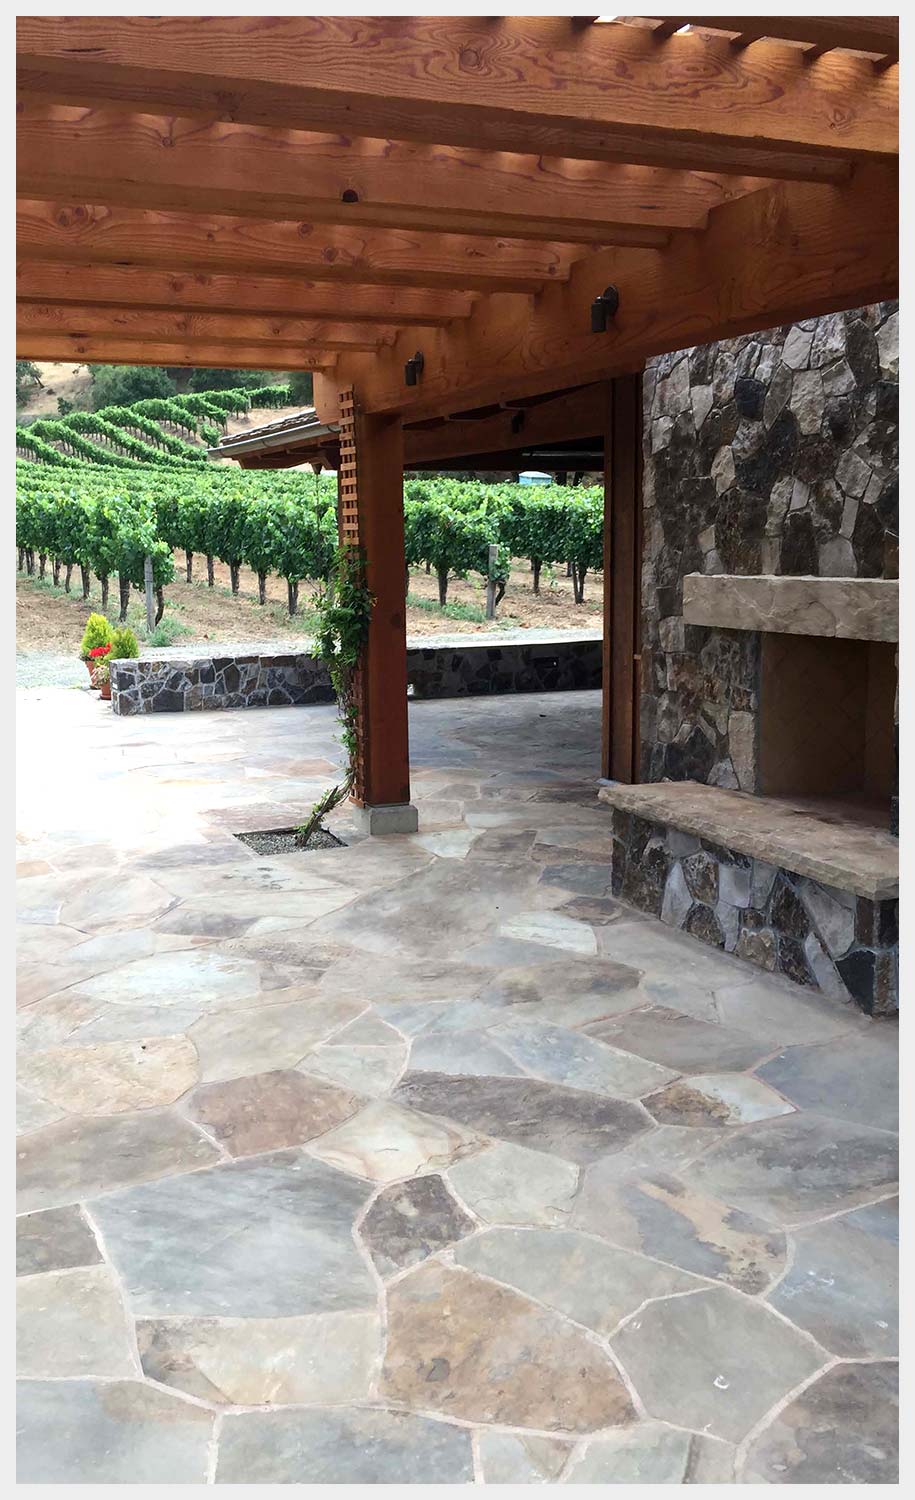 Shannon Masonry Construction - Residential, Commercial and Winery Stone Masonry Contractor - Stone Fireplace and Commend Area Masonry Construction Project - Serving the San Francisco CA Bay Area